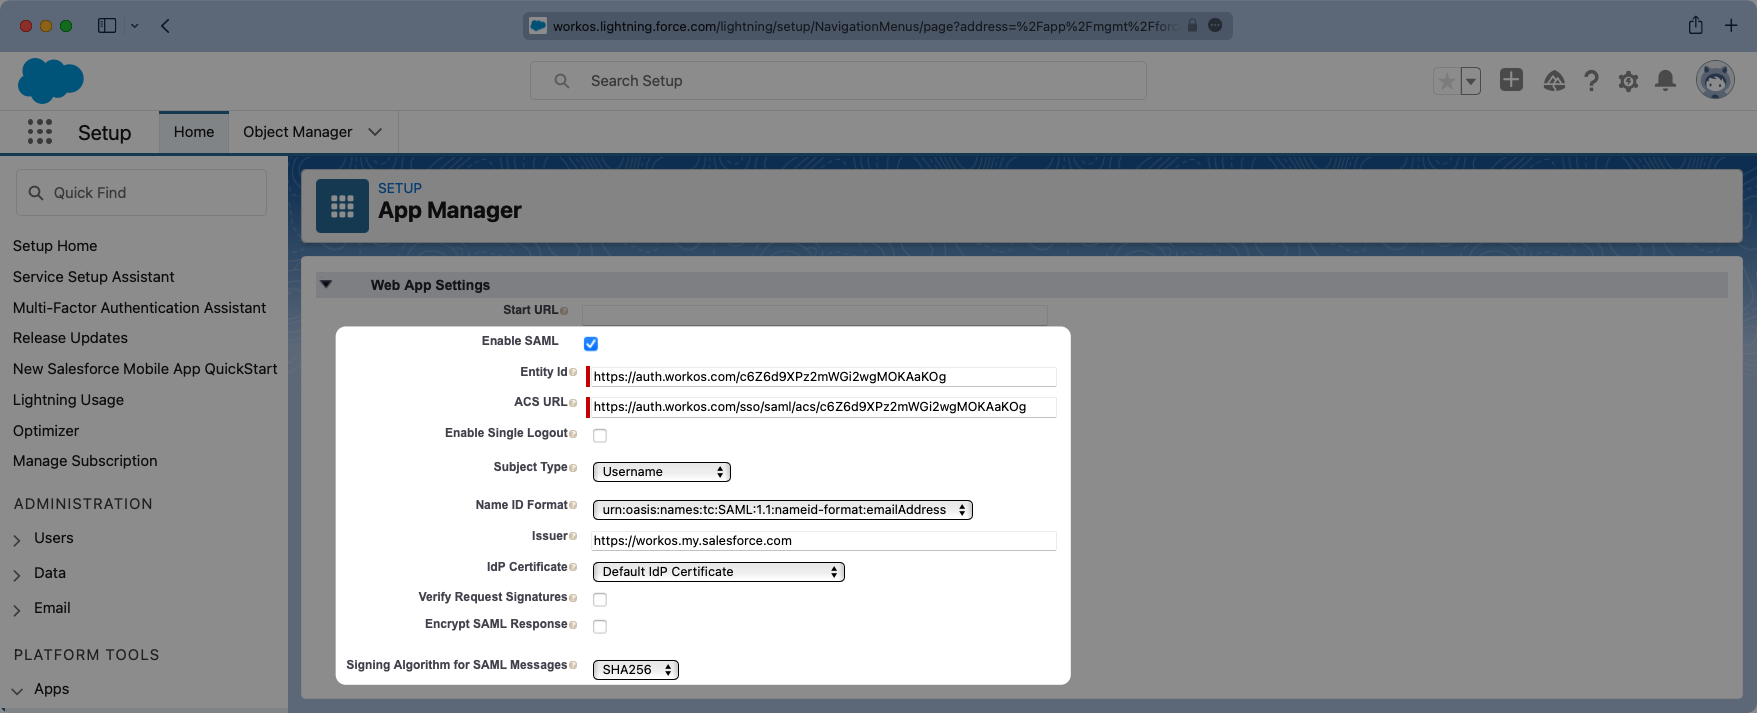 A screenshot showing how to configure the Connected App's Web App Settings in the Salesforce Dashboard.